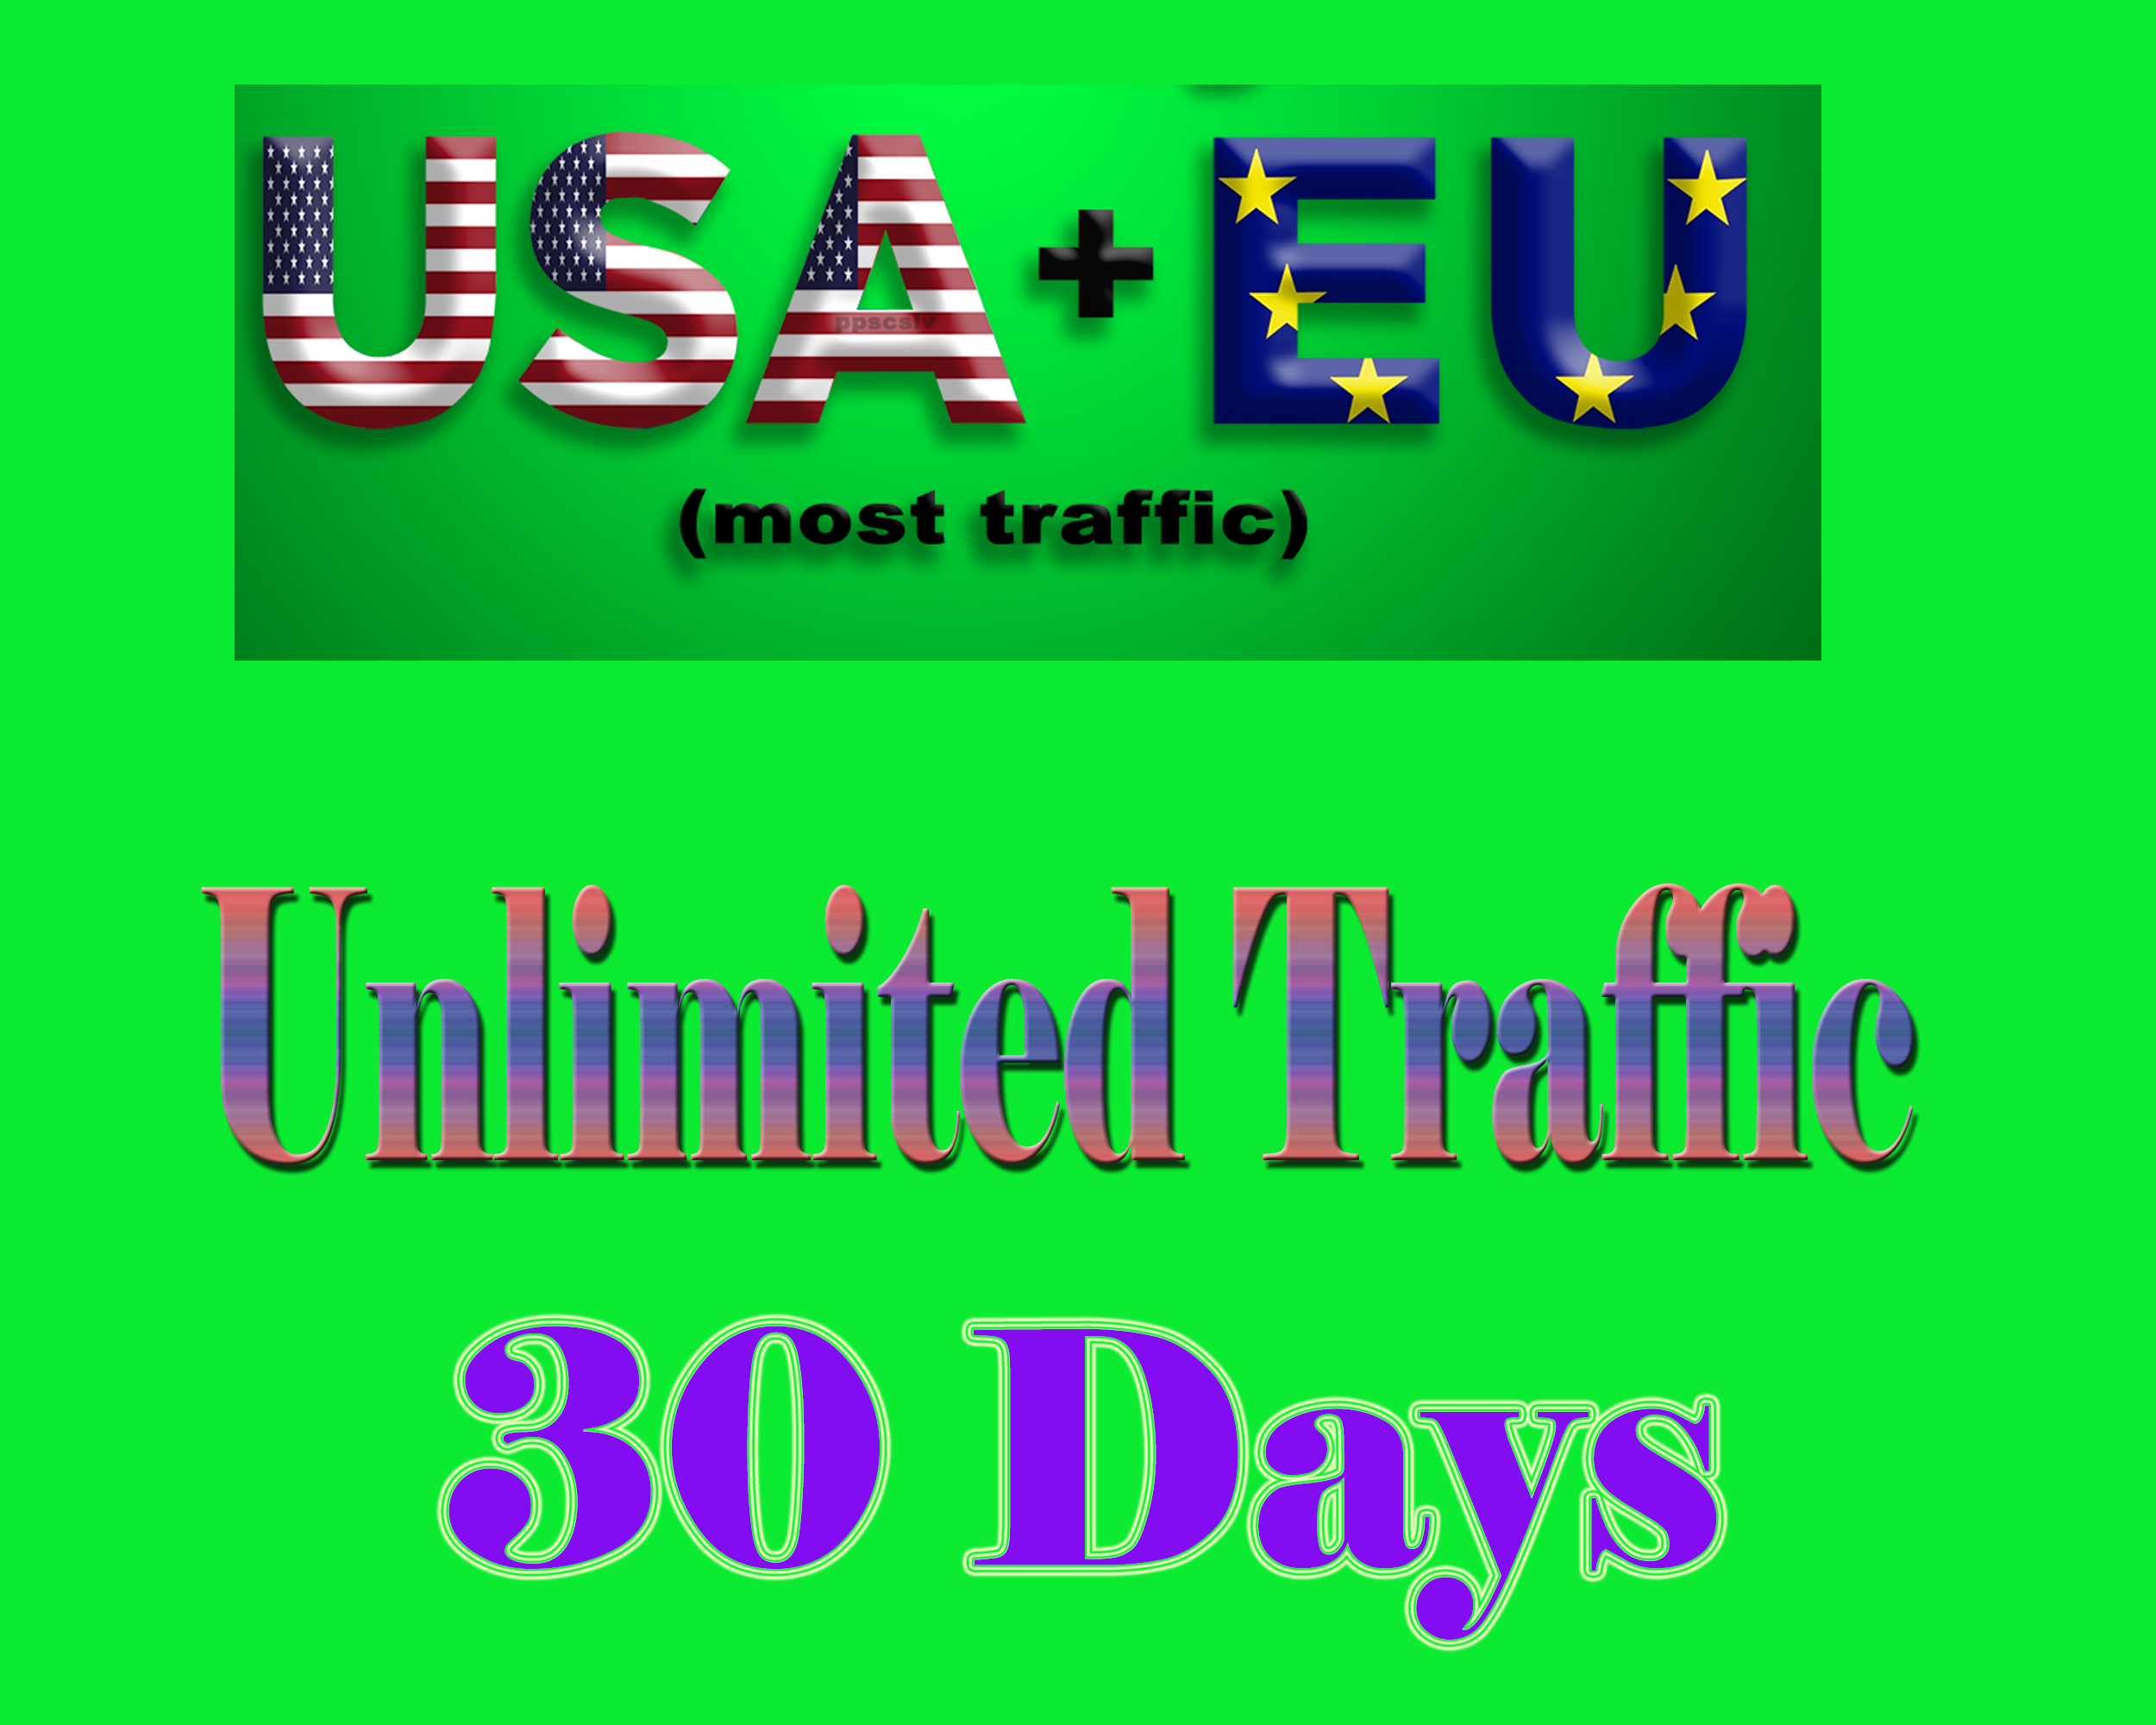 USA EU Unlimited Website Traffic for 1 month